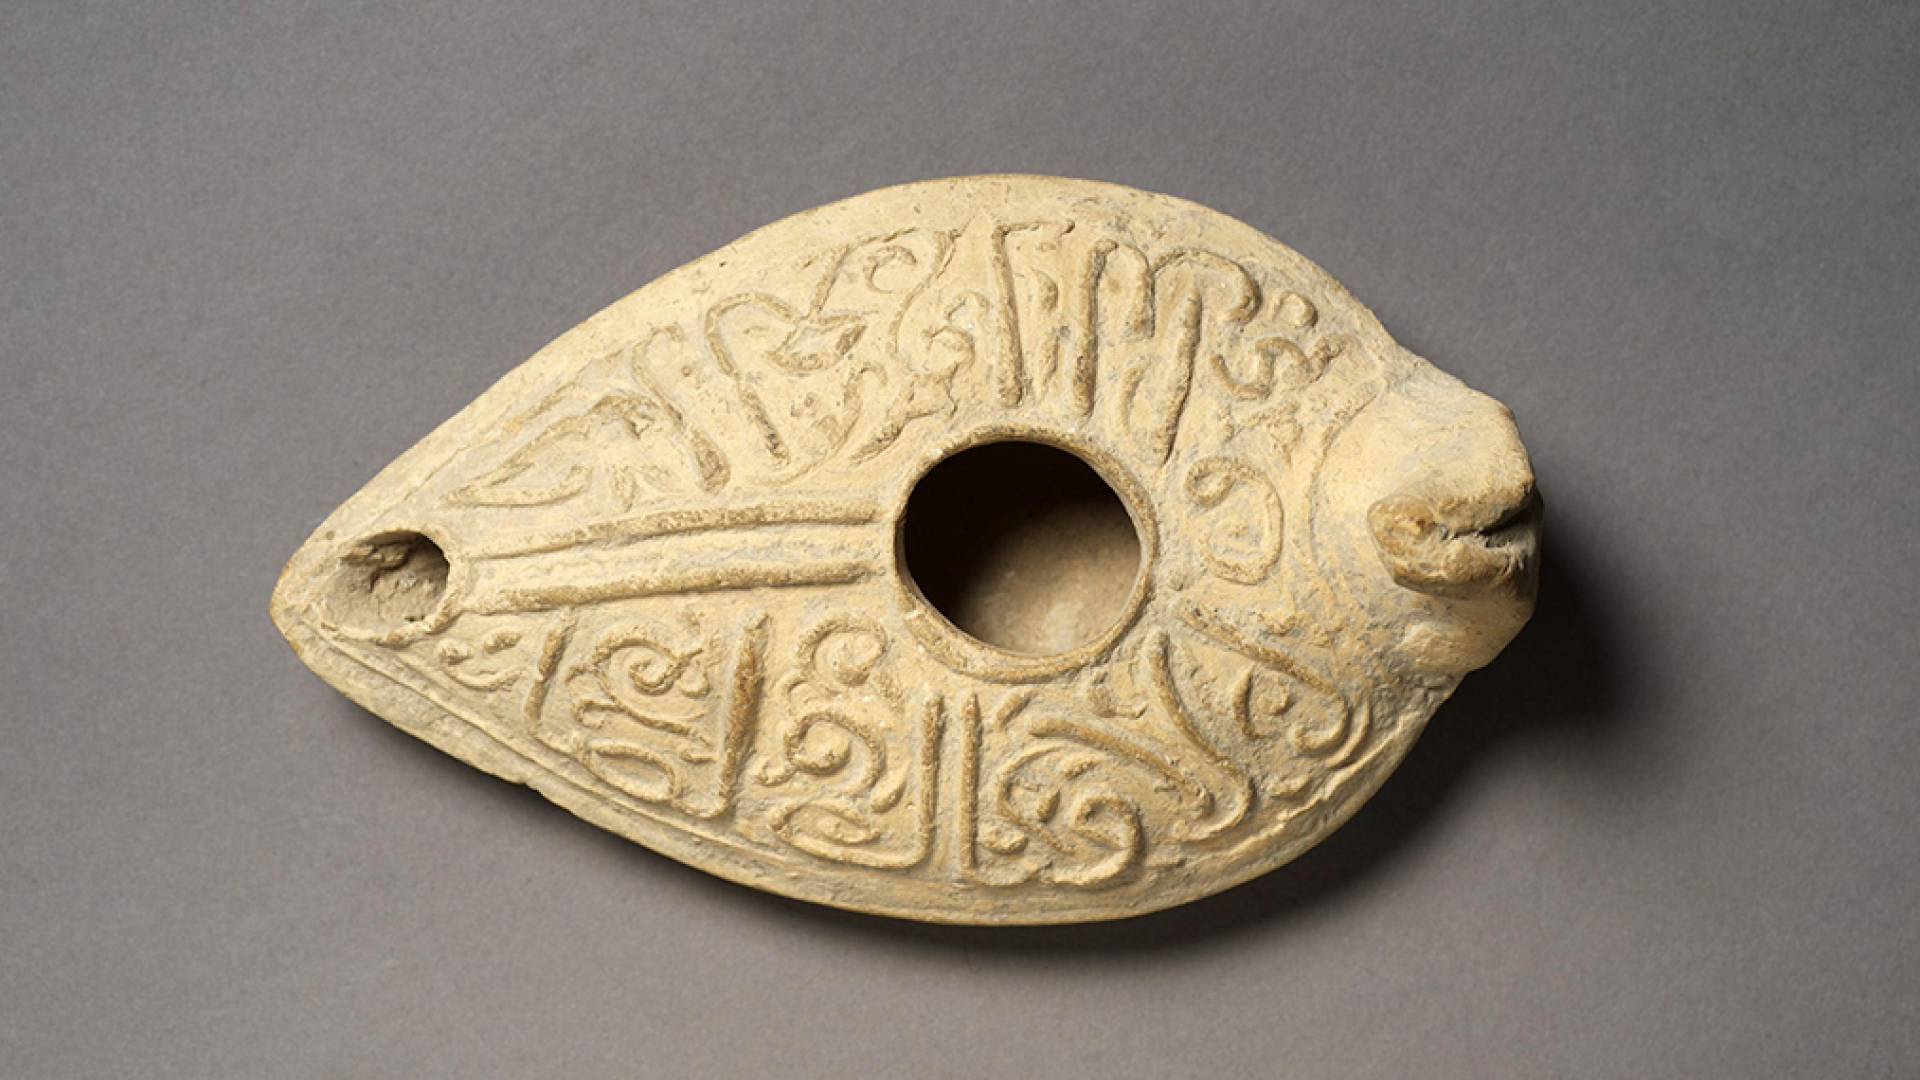 Oil lamp inscribed with good wishes to the owner in cursive Arabic.